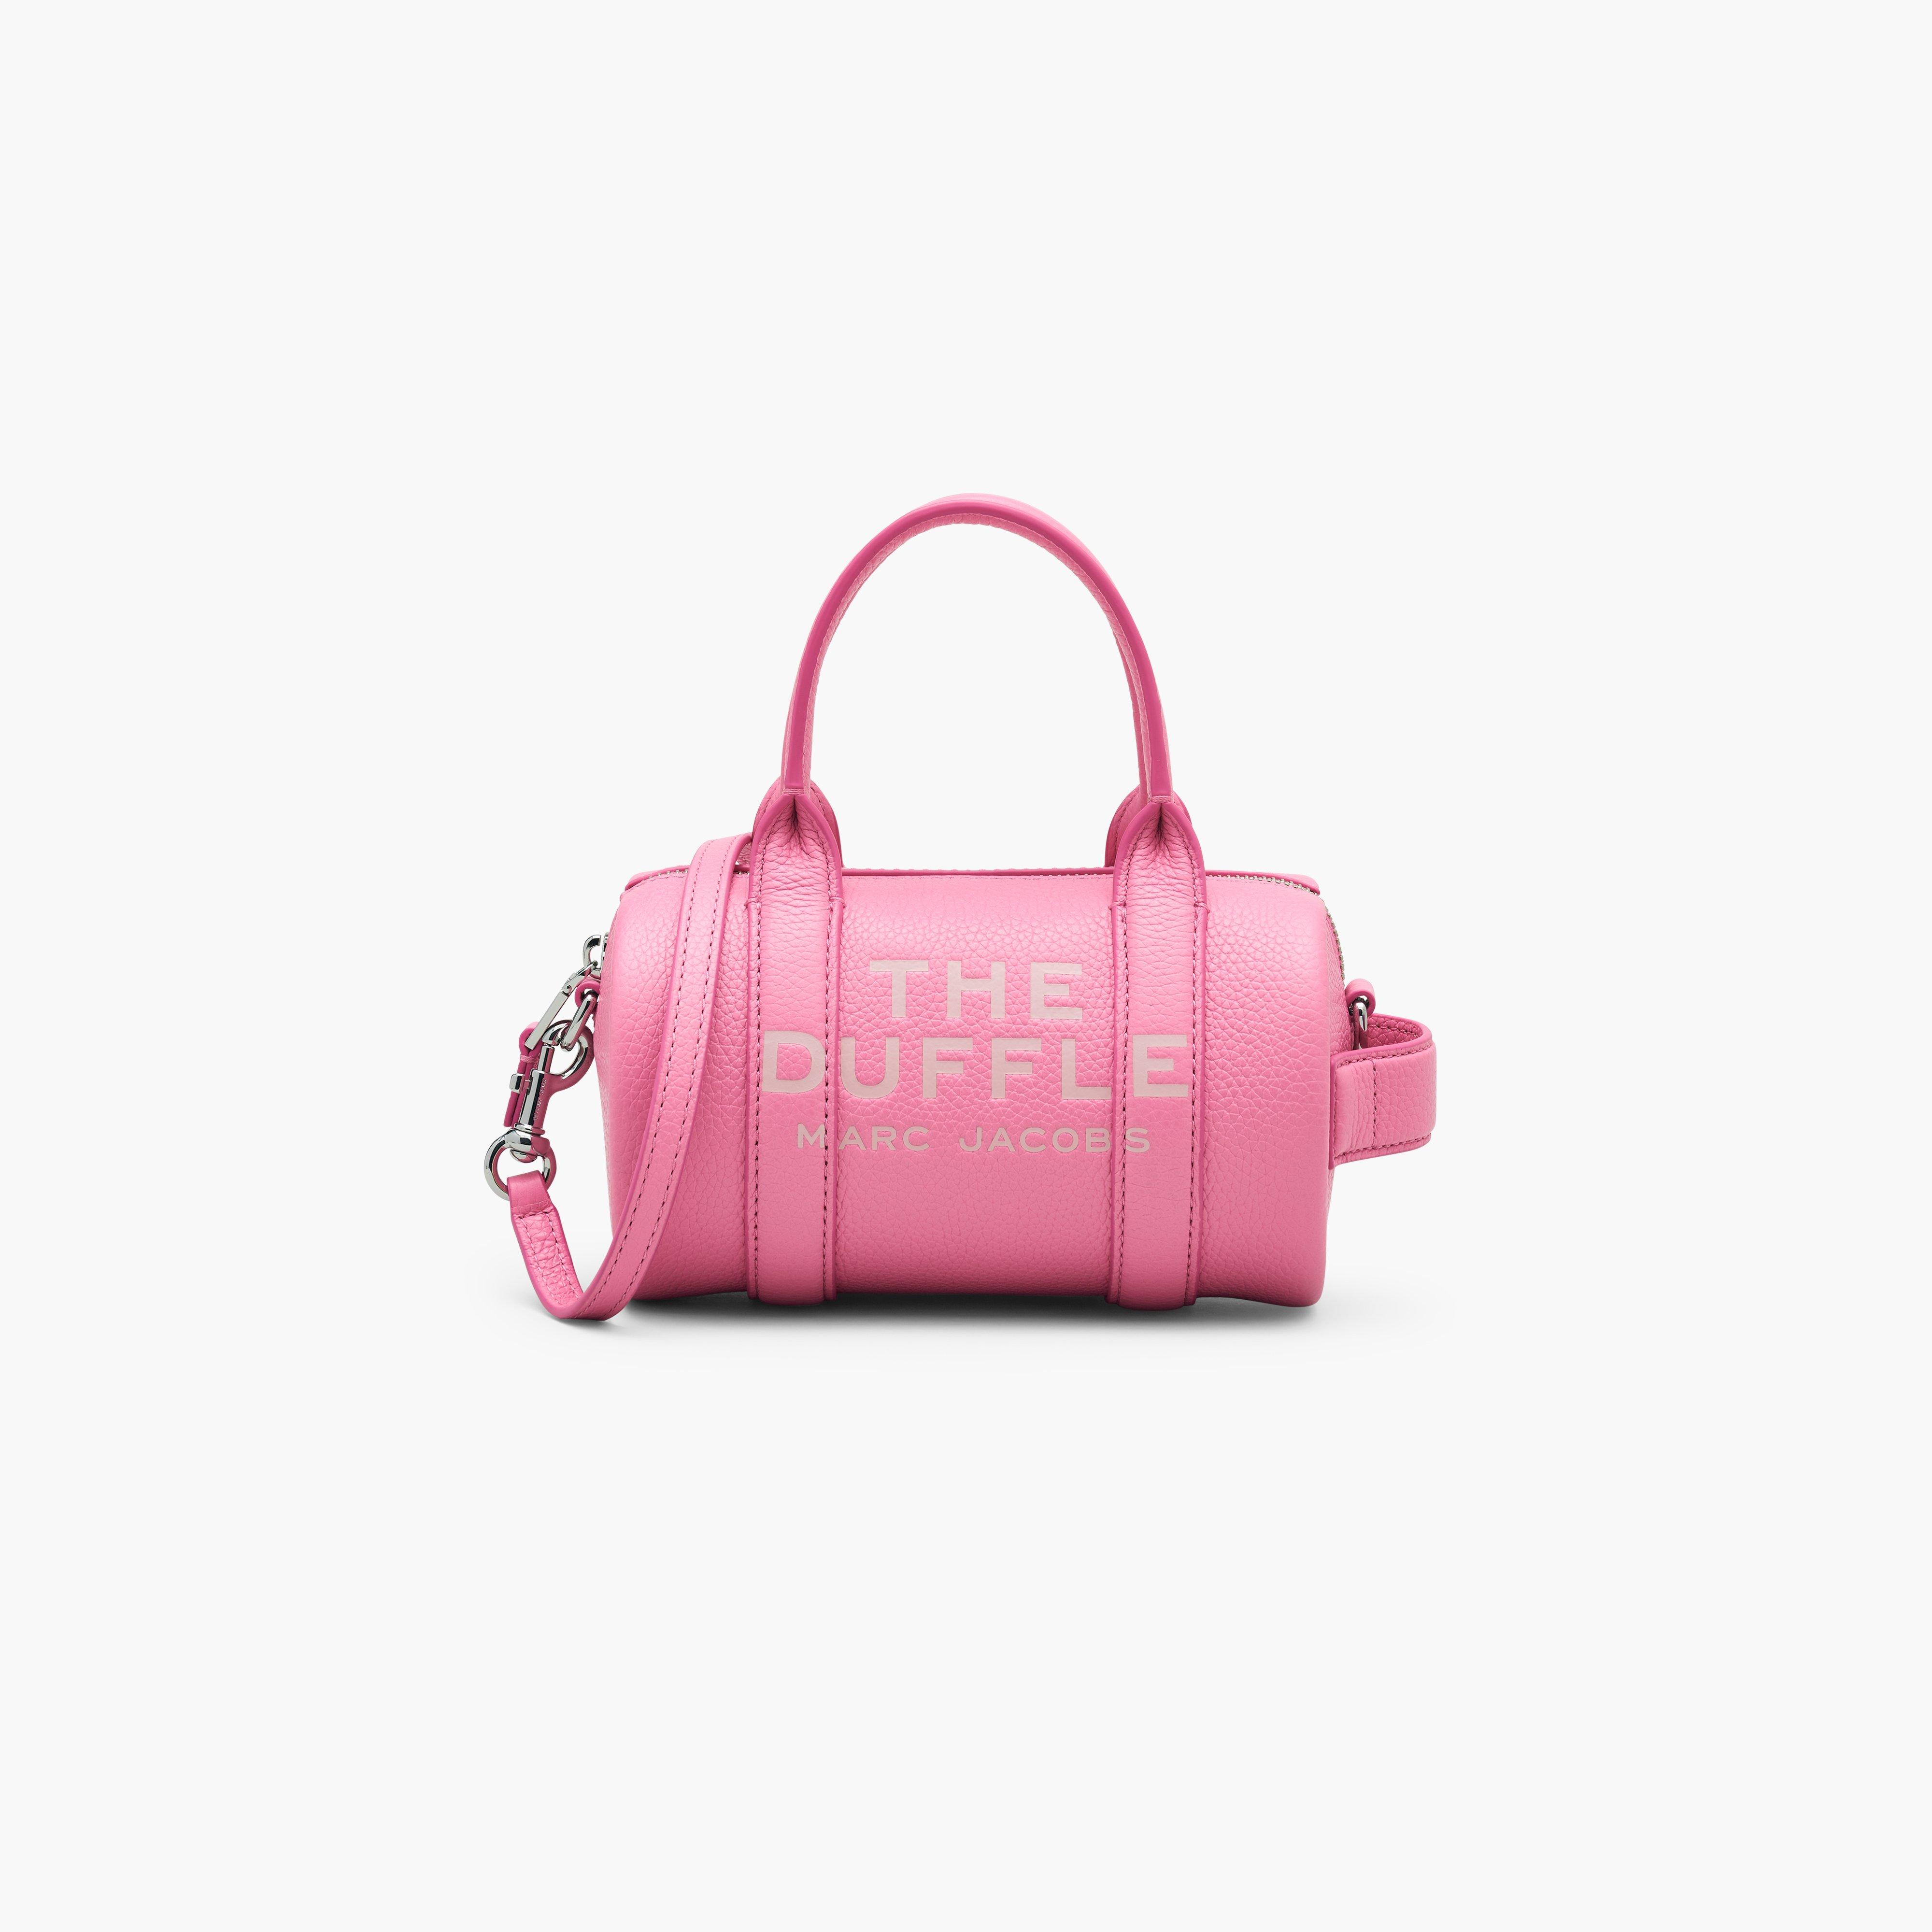 Marc by Marc jacobs The Leather Mini Duffle Bag,PETAL PINK